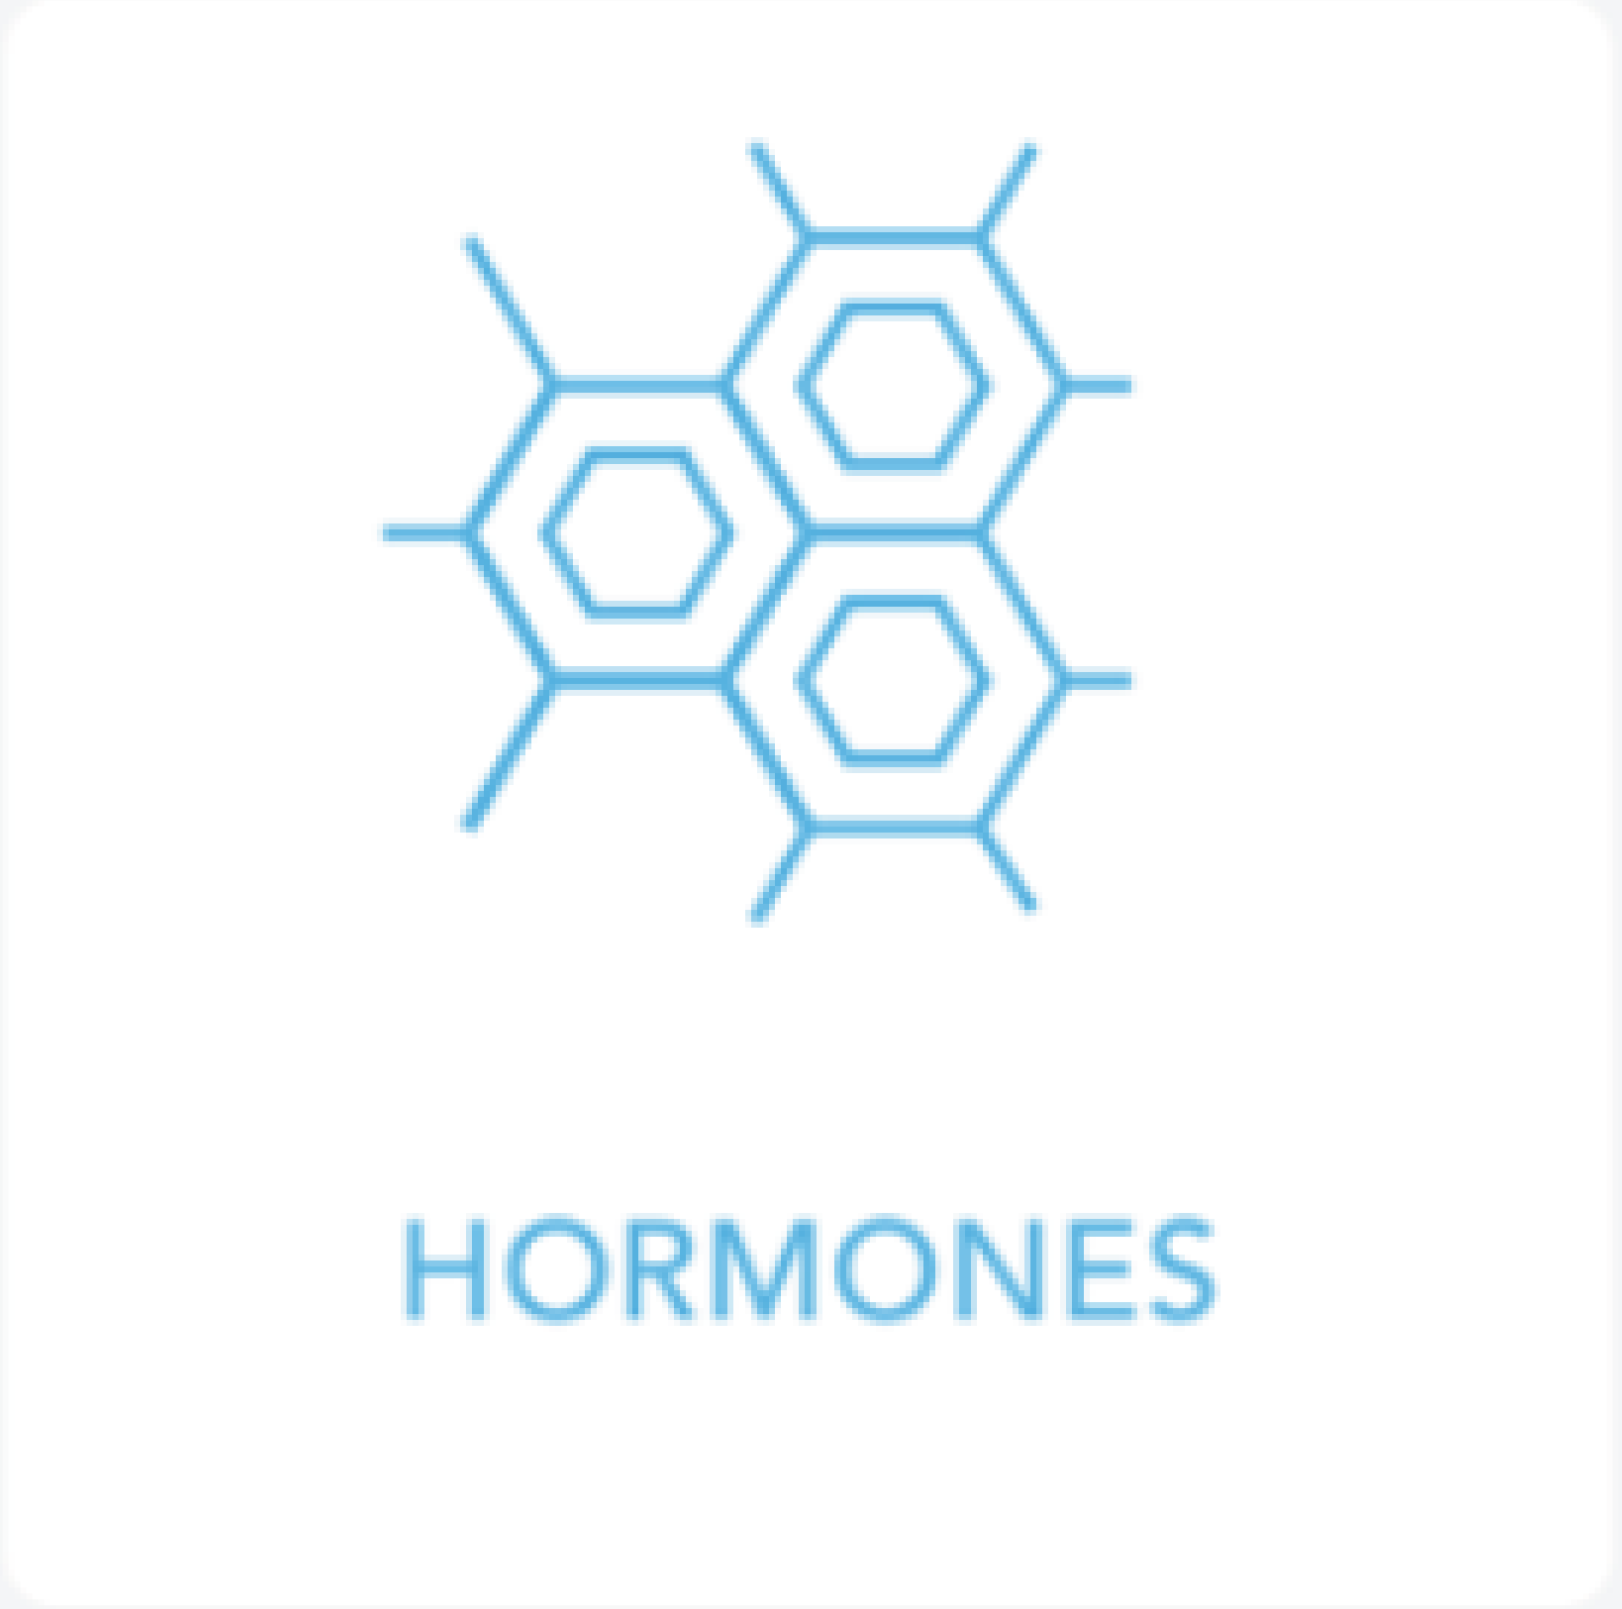 A blue icon with the word hormones written in it.